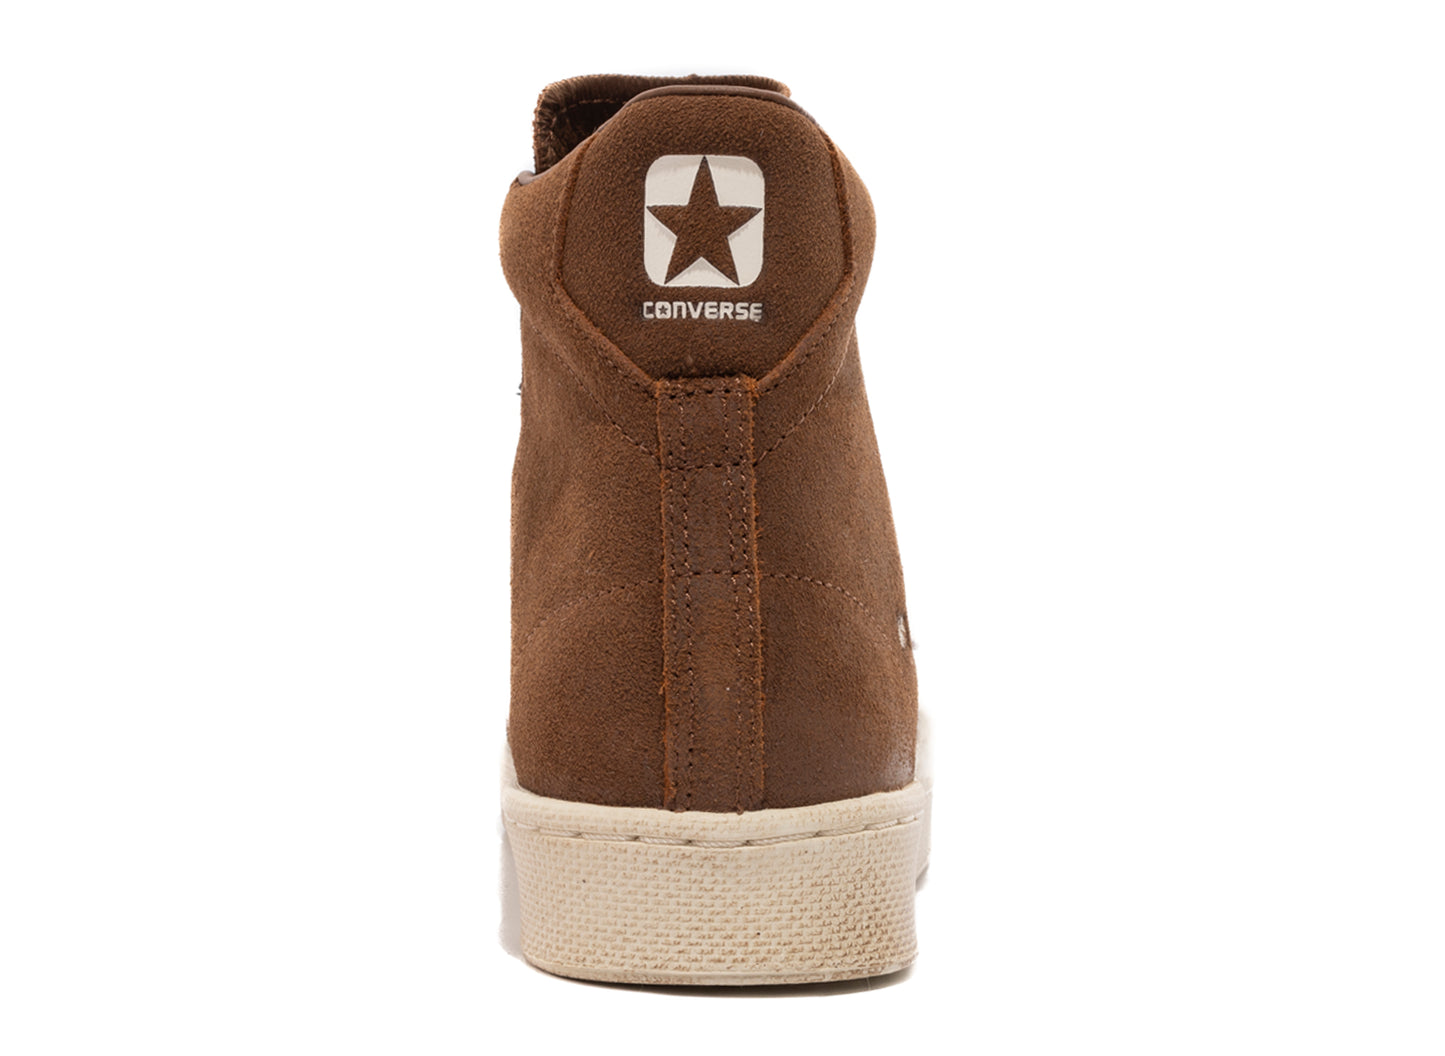 Barriers x Converse Pro Leather Hi 'Monks Robe'